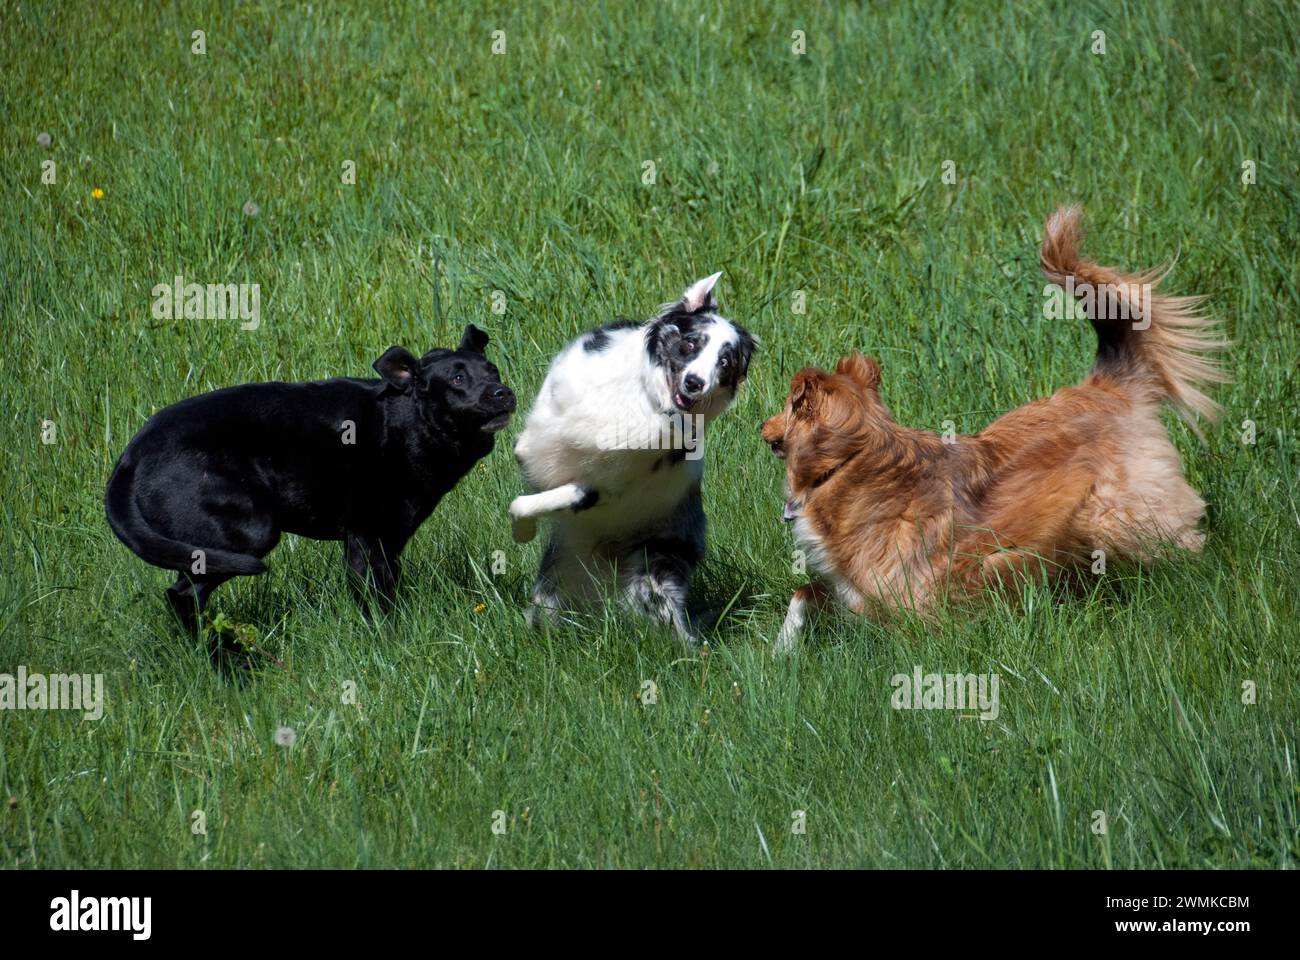 Three dogs playing together in a grass field Stock Photo